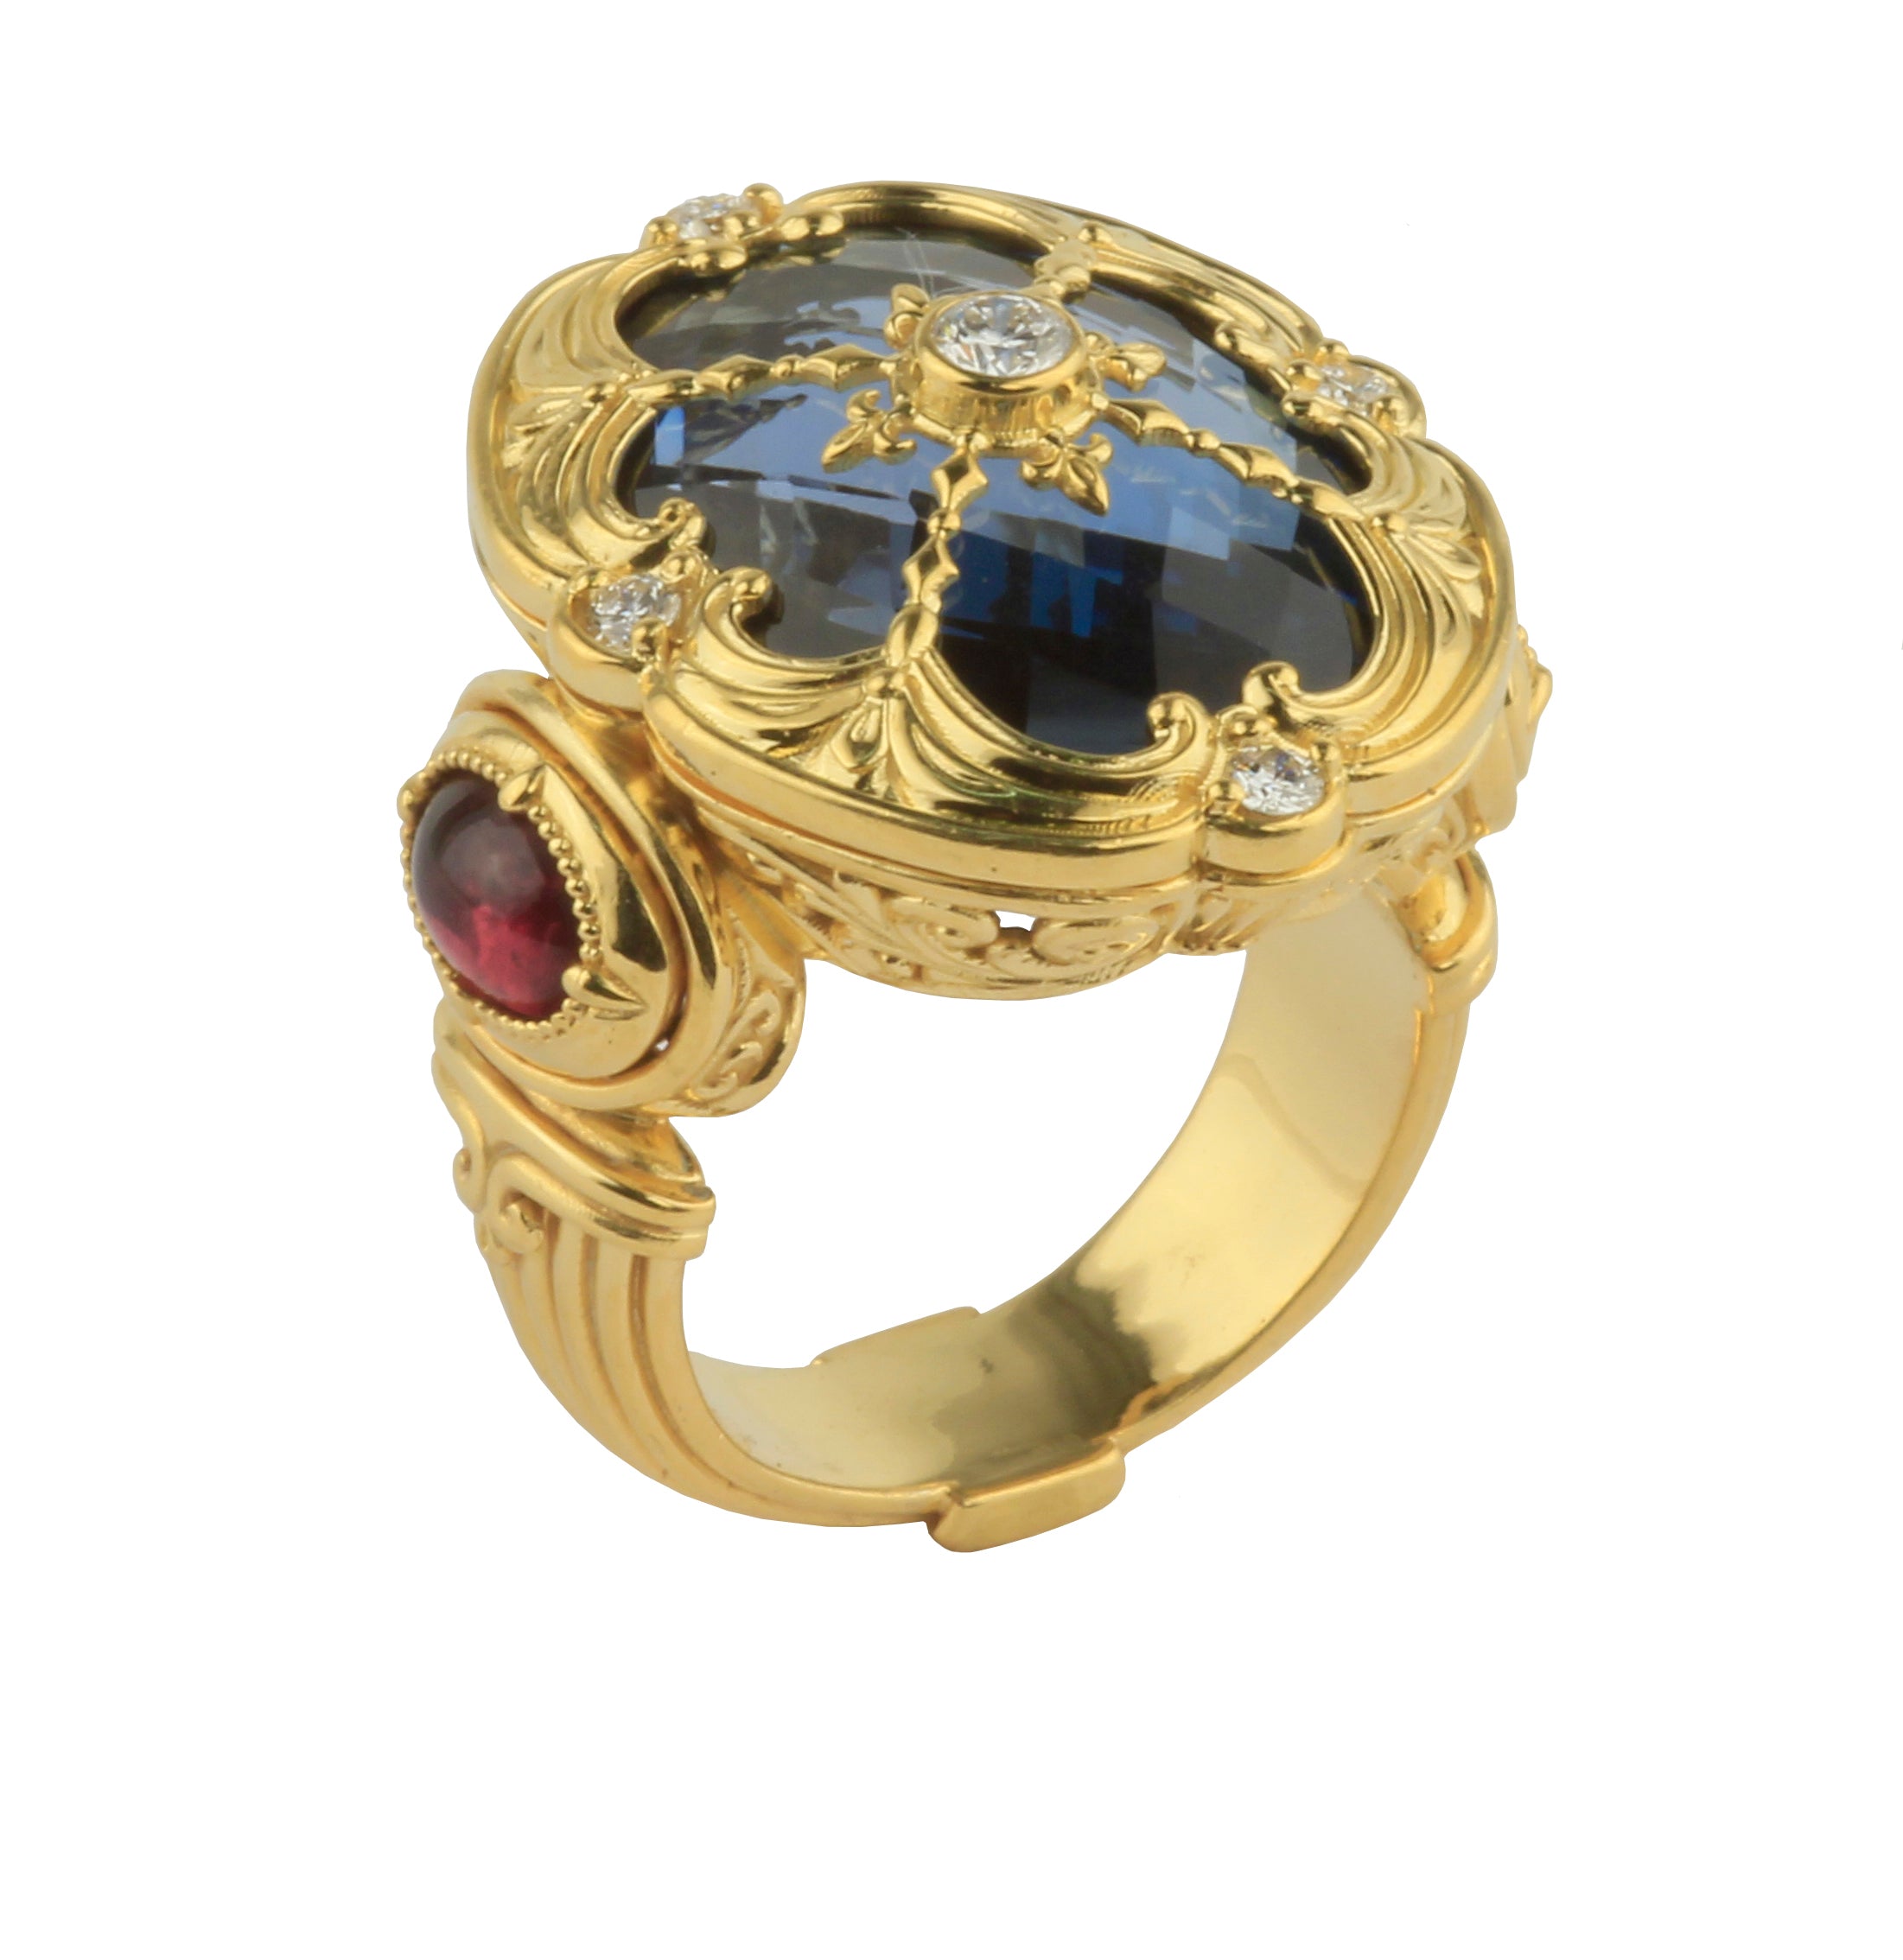 KONSTANTINO 18KT GOLD (11.0GR +/-) LONDON BLUE TOPAZ (22.0CT +/-)  (OTHER STONE CHOICES AVAILABLE) R